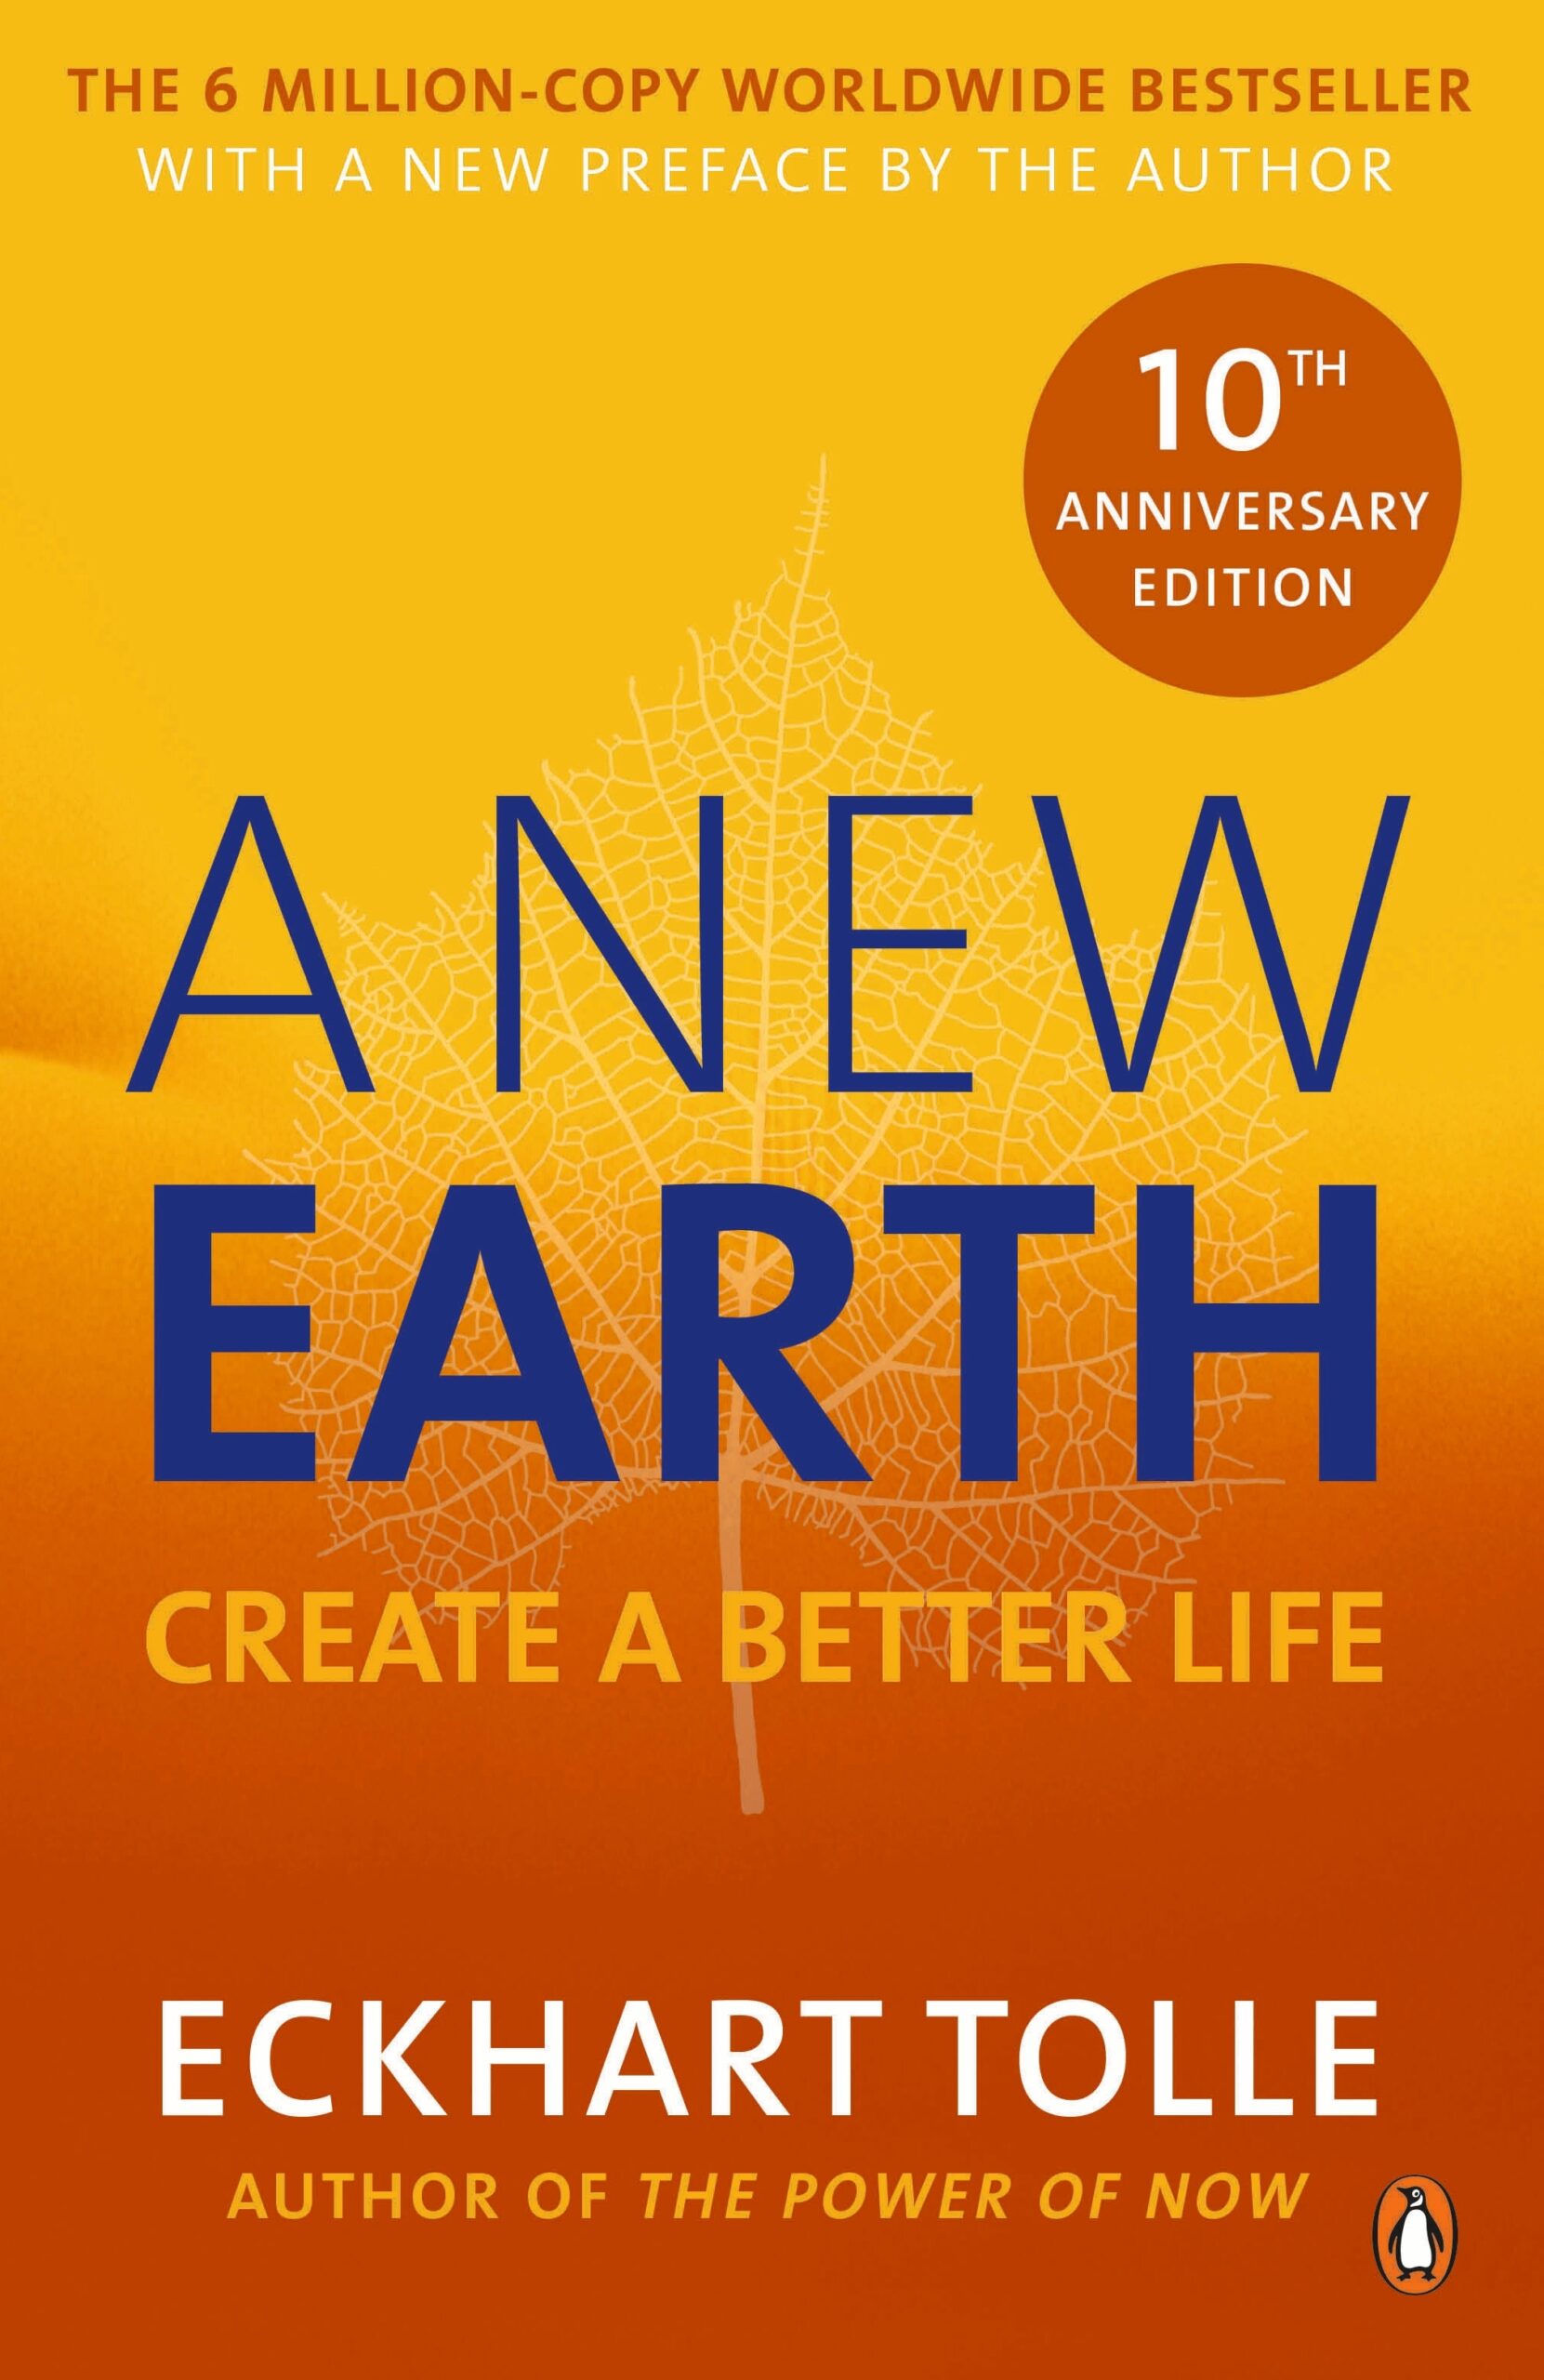 A New Earth - Eckhart Tolle